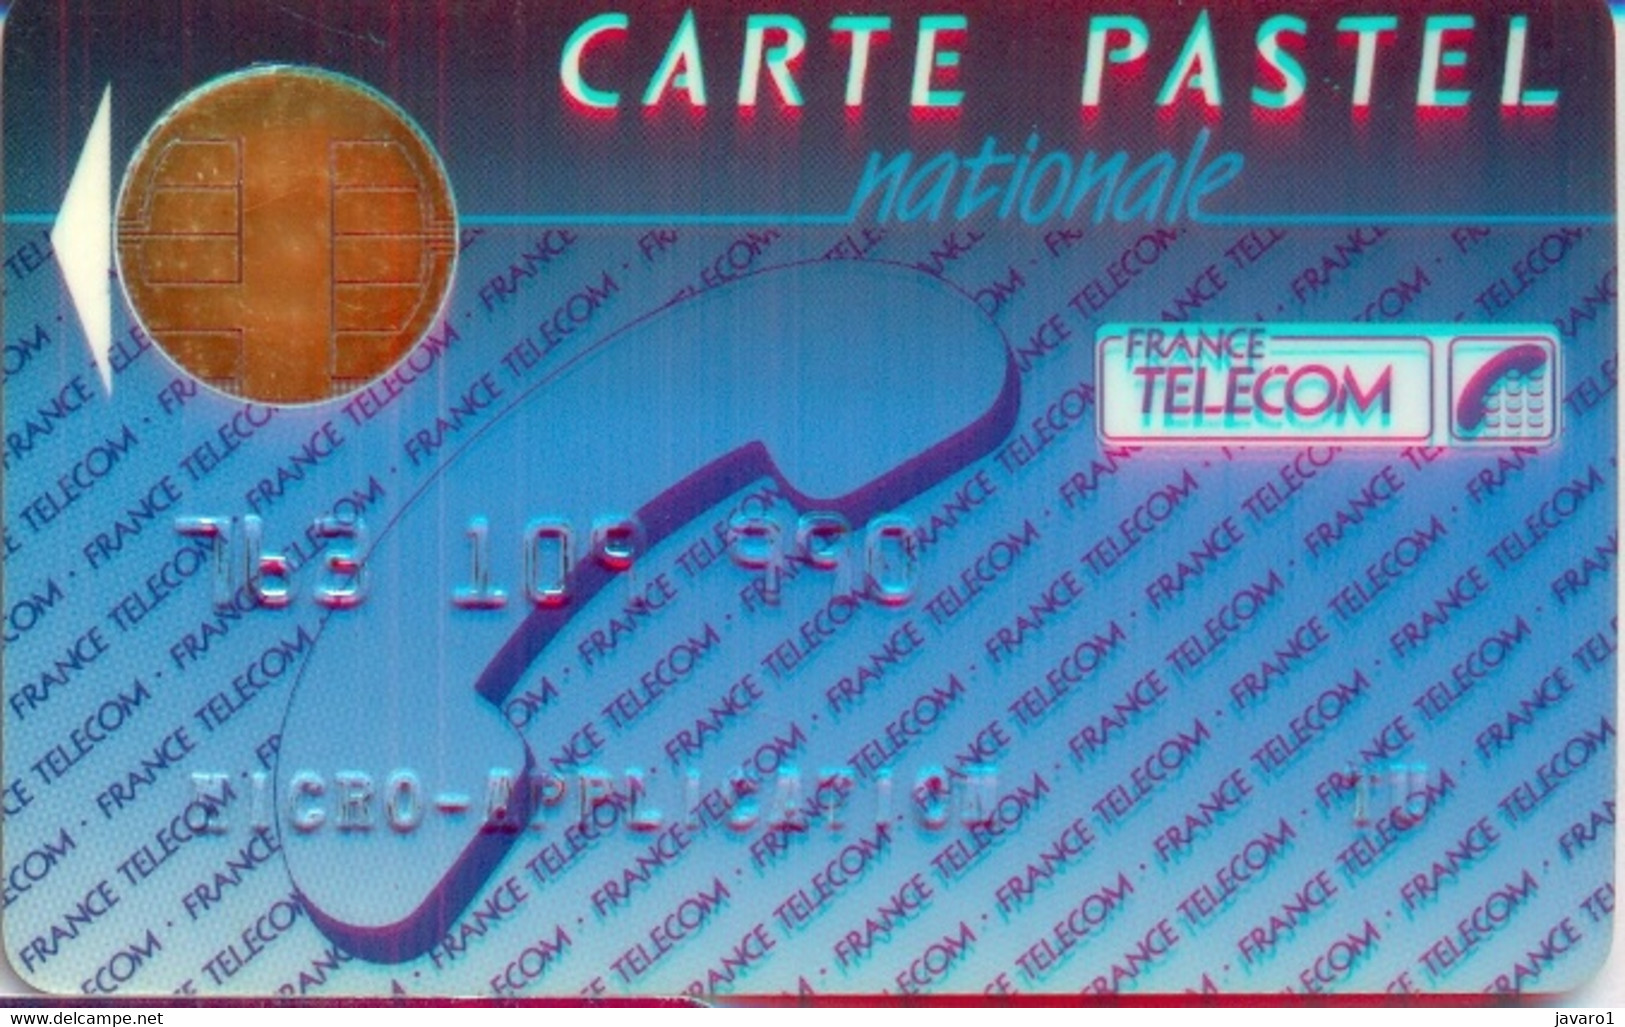 FRANCE : FRA15 CARTE PASTEL NATIONALE BULL Big-1 Reverse 1 USED -  Schede Di Tipo Pastel   